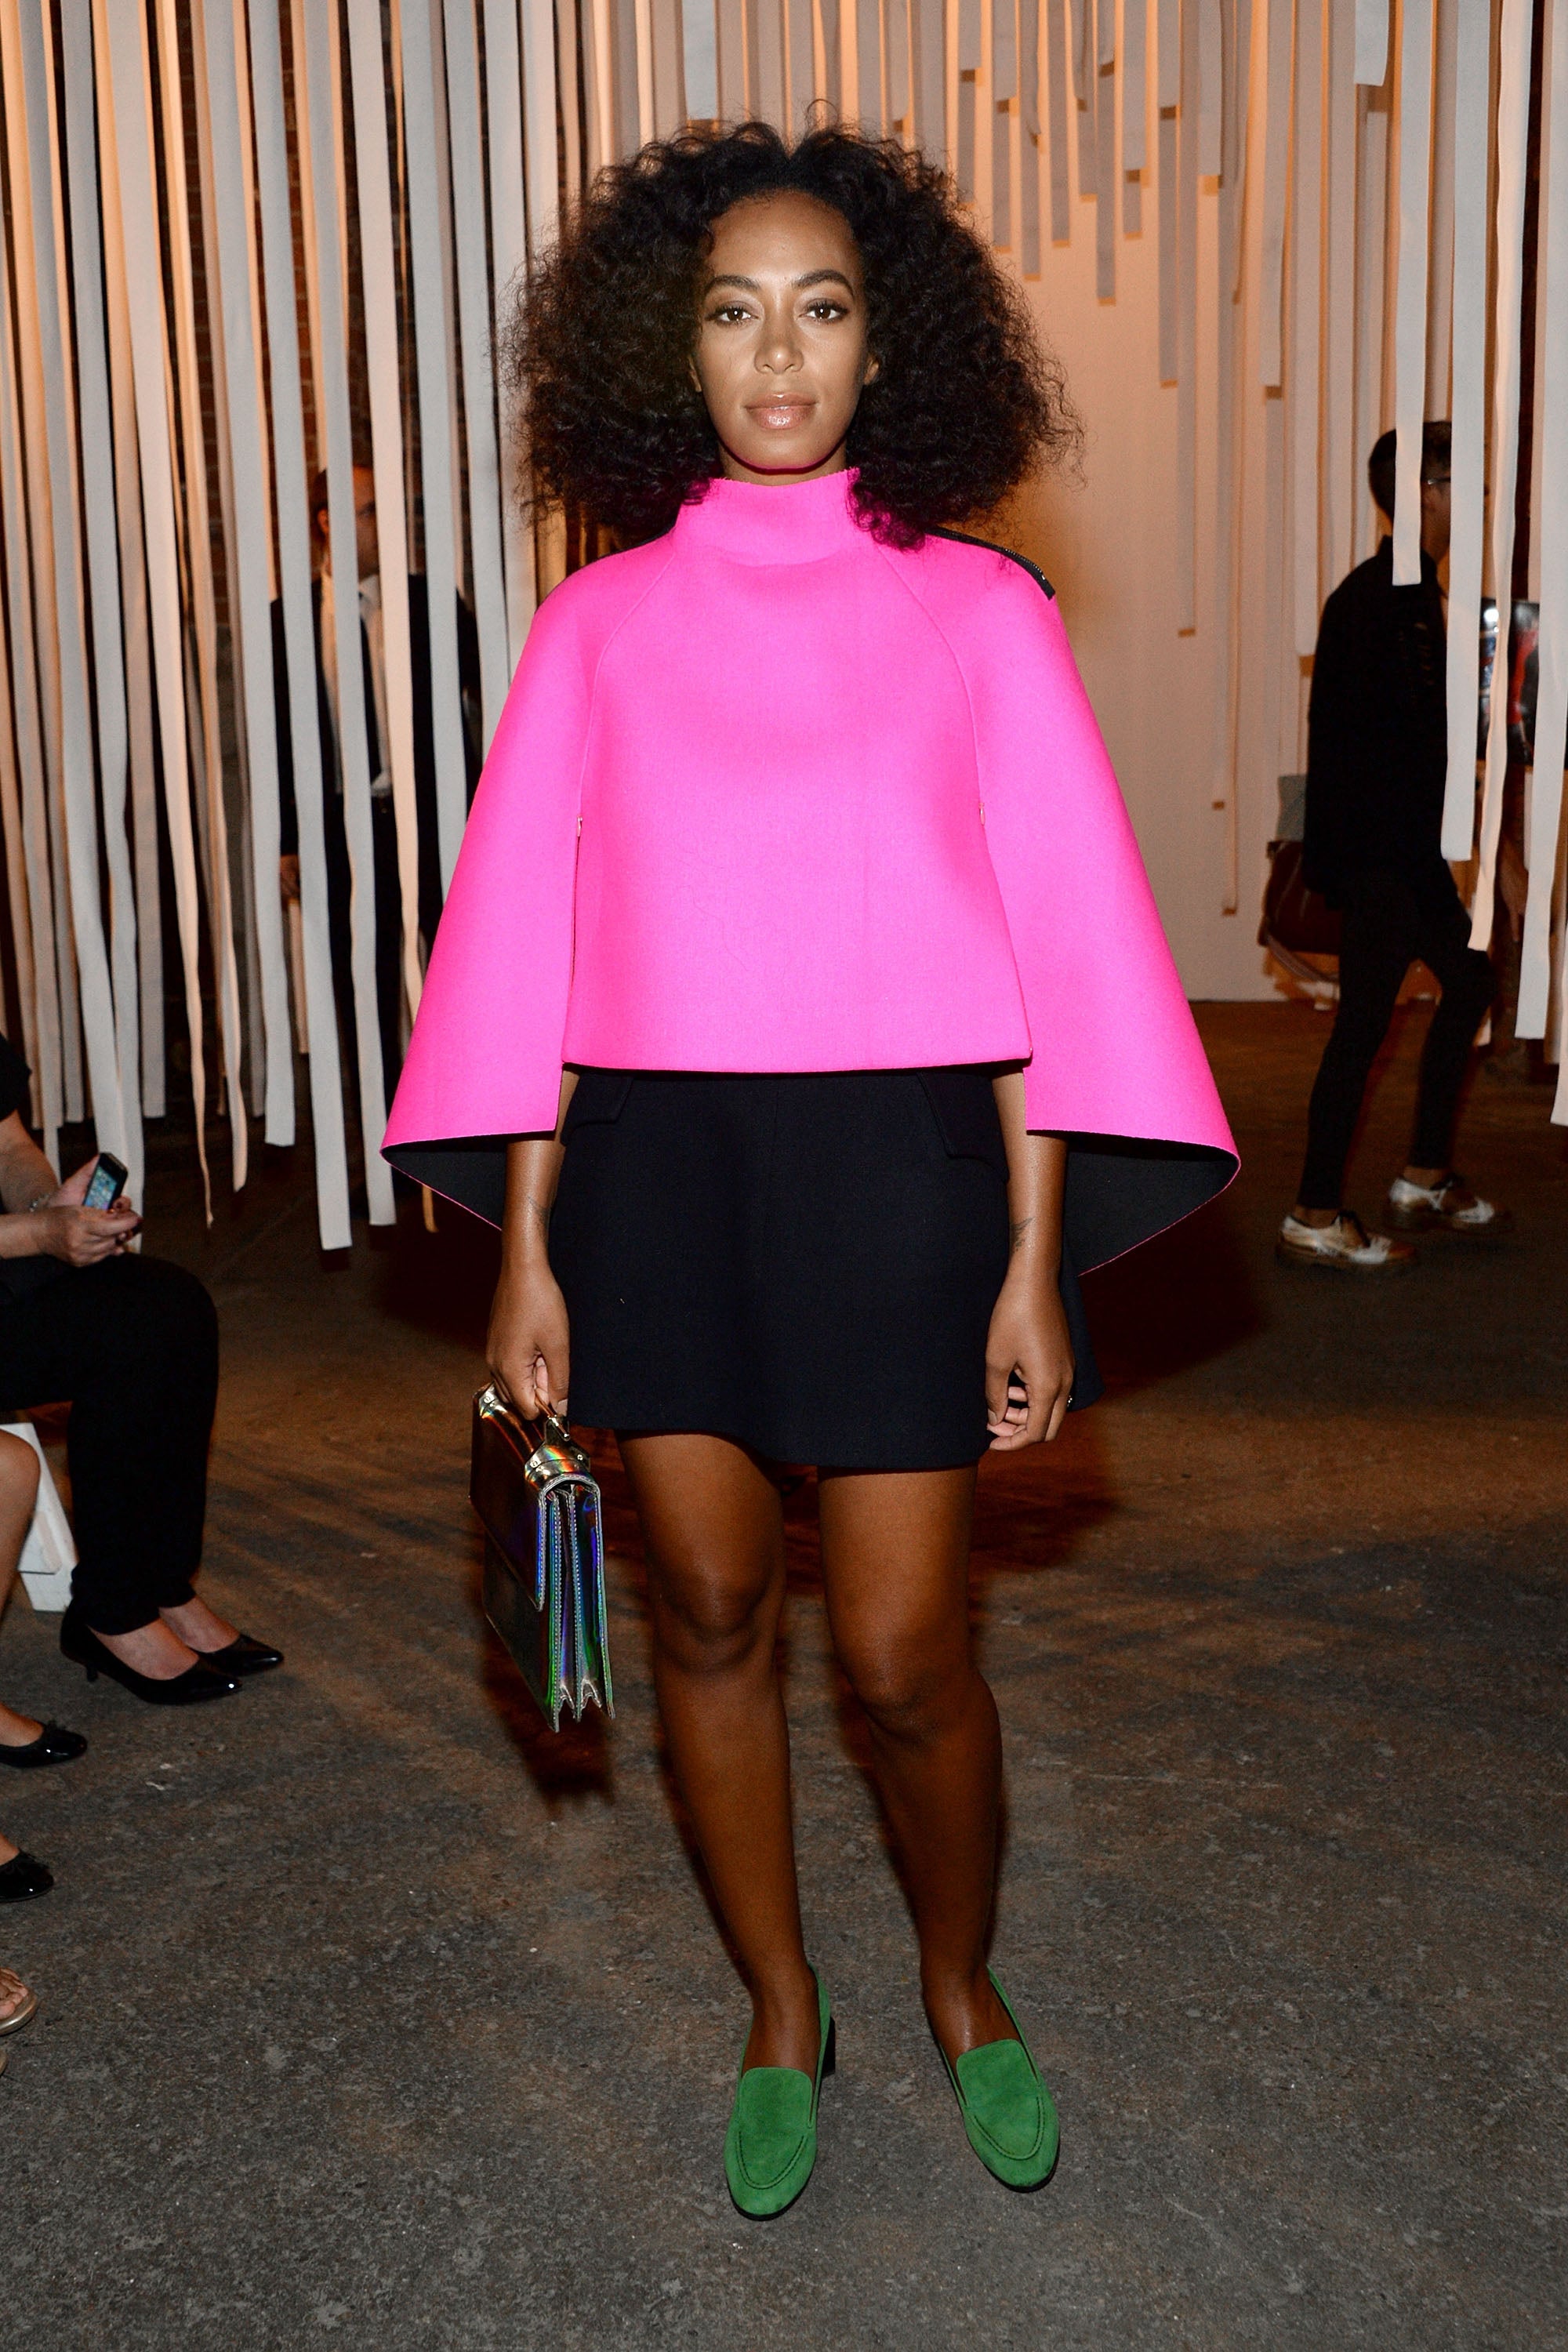 You'll Never Guess What R&B Singer Was Solange's Teenage Boo